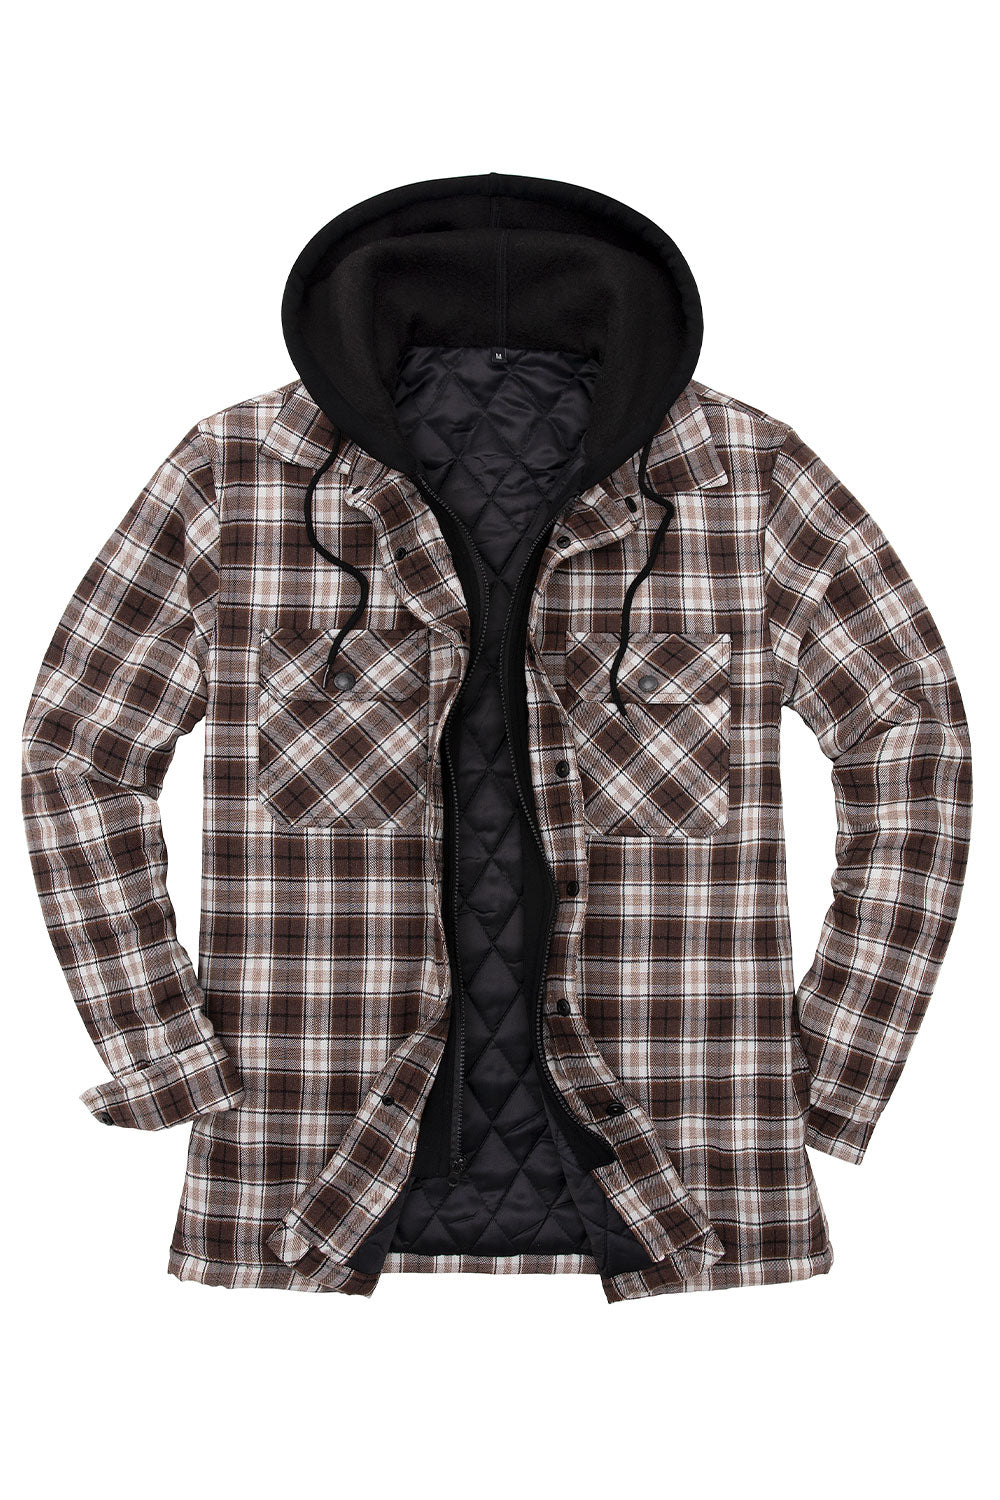 HABEN Men Quilted Lined Hooded Shirt Jacket Outdoor Plaid Trucker